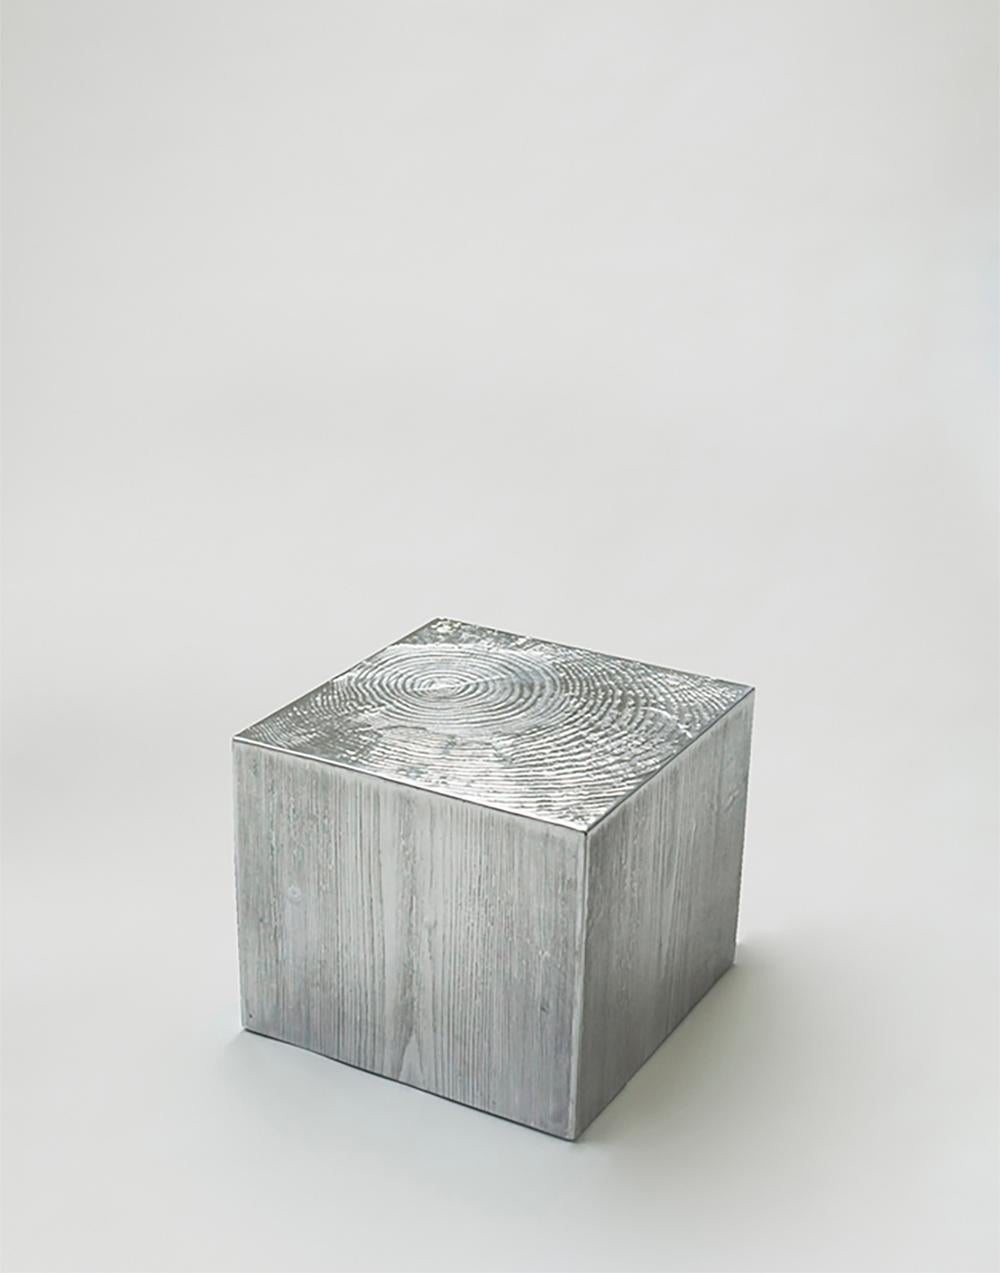 Coffee table in cast aluminium with wooden-textured shape designed by Andrea Salvetti for Dilmos Milano. 
The table represents a piece of trunk casted in polished aluminium. 

Signed by the artist.
Suitable also for outdoors.

Available in different